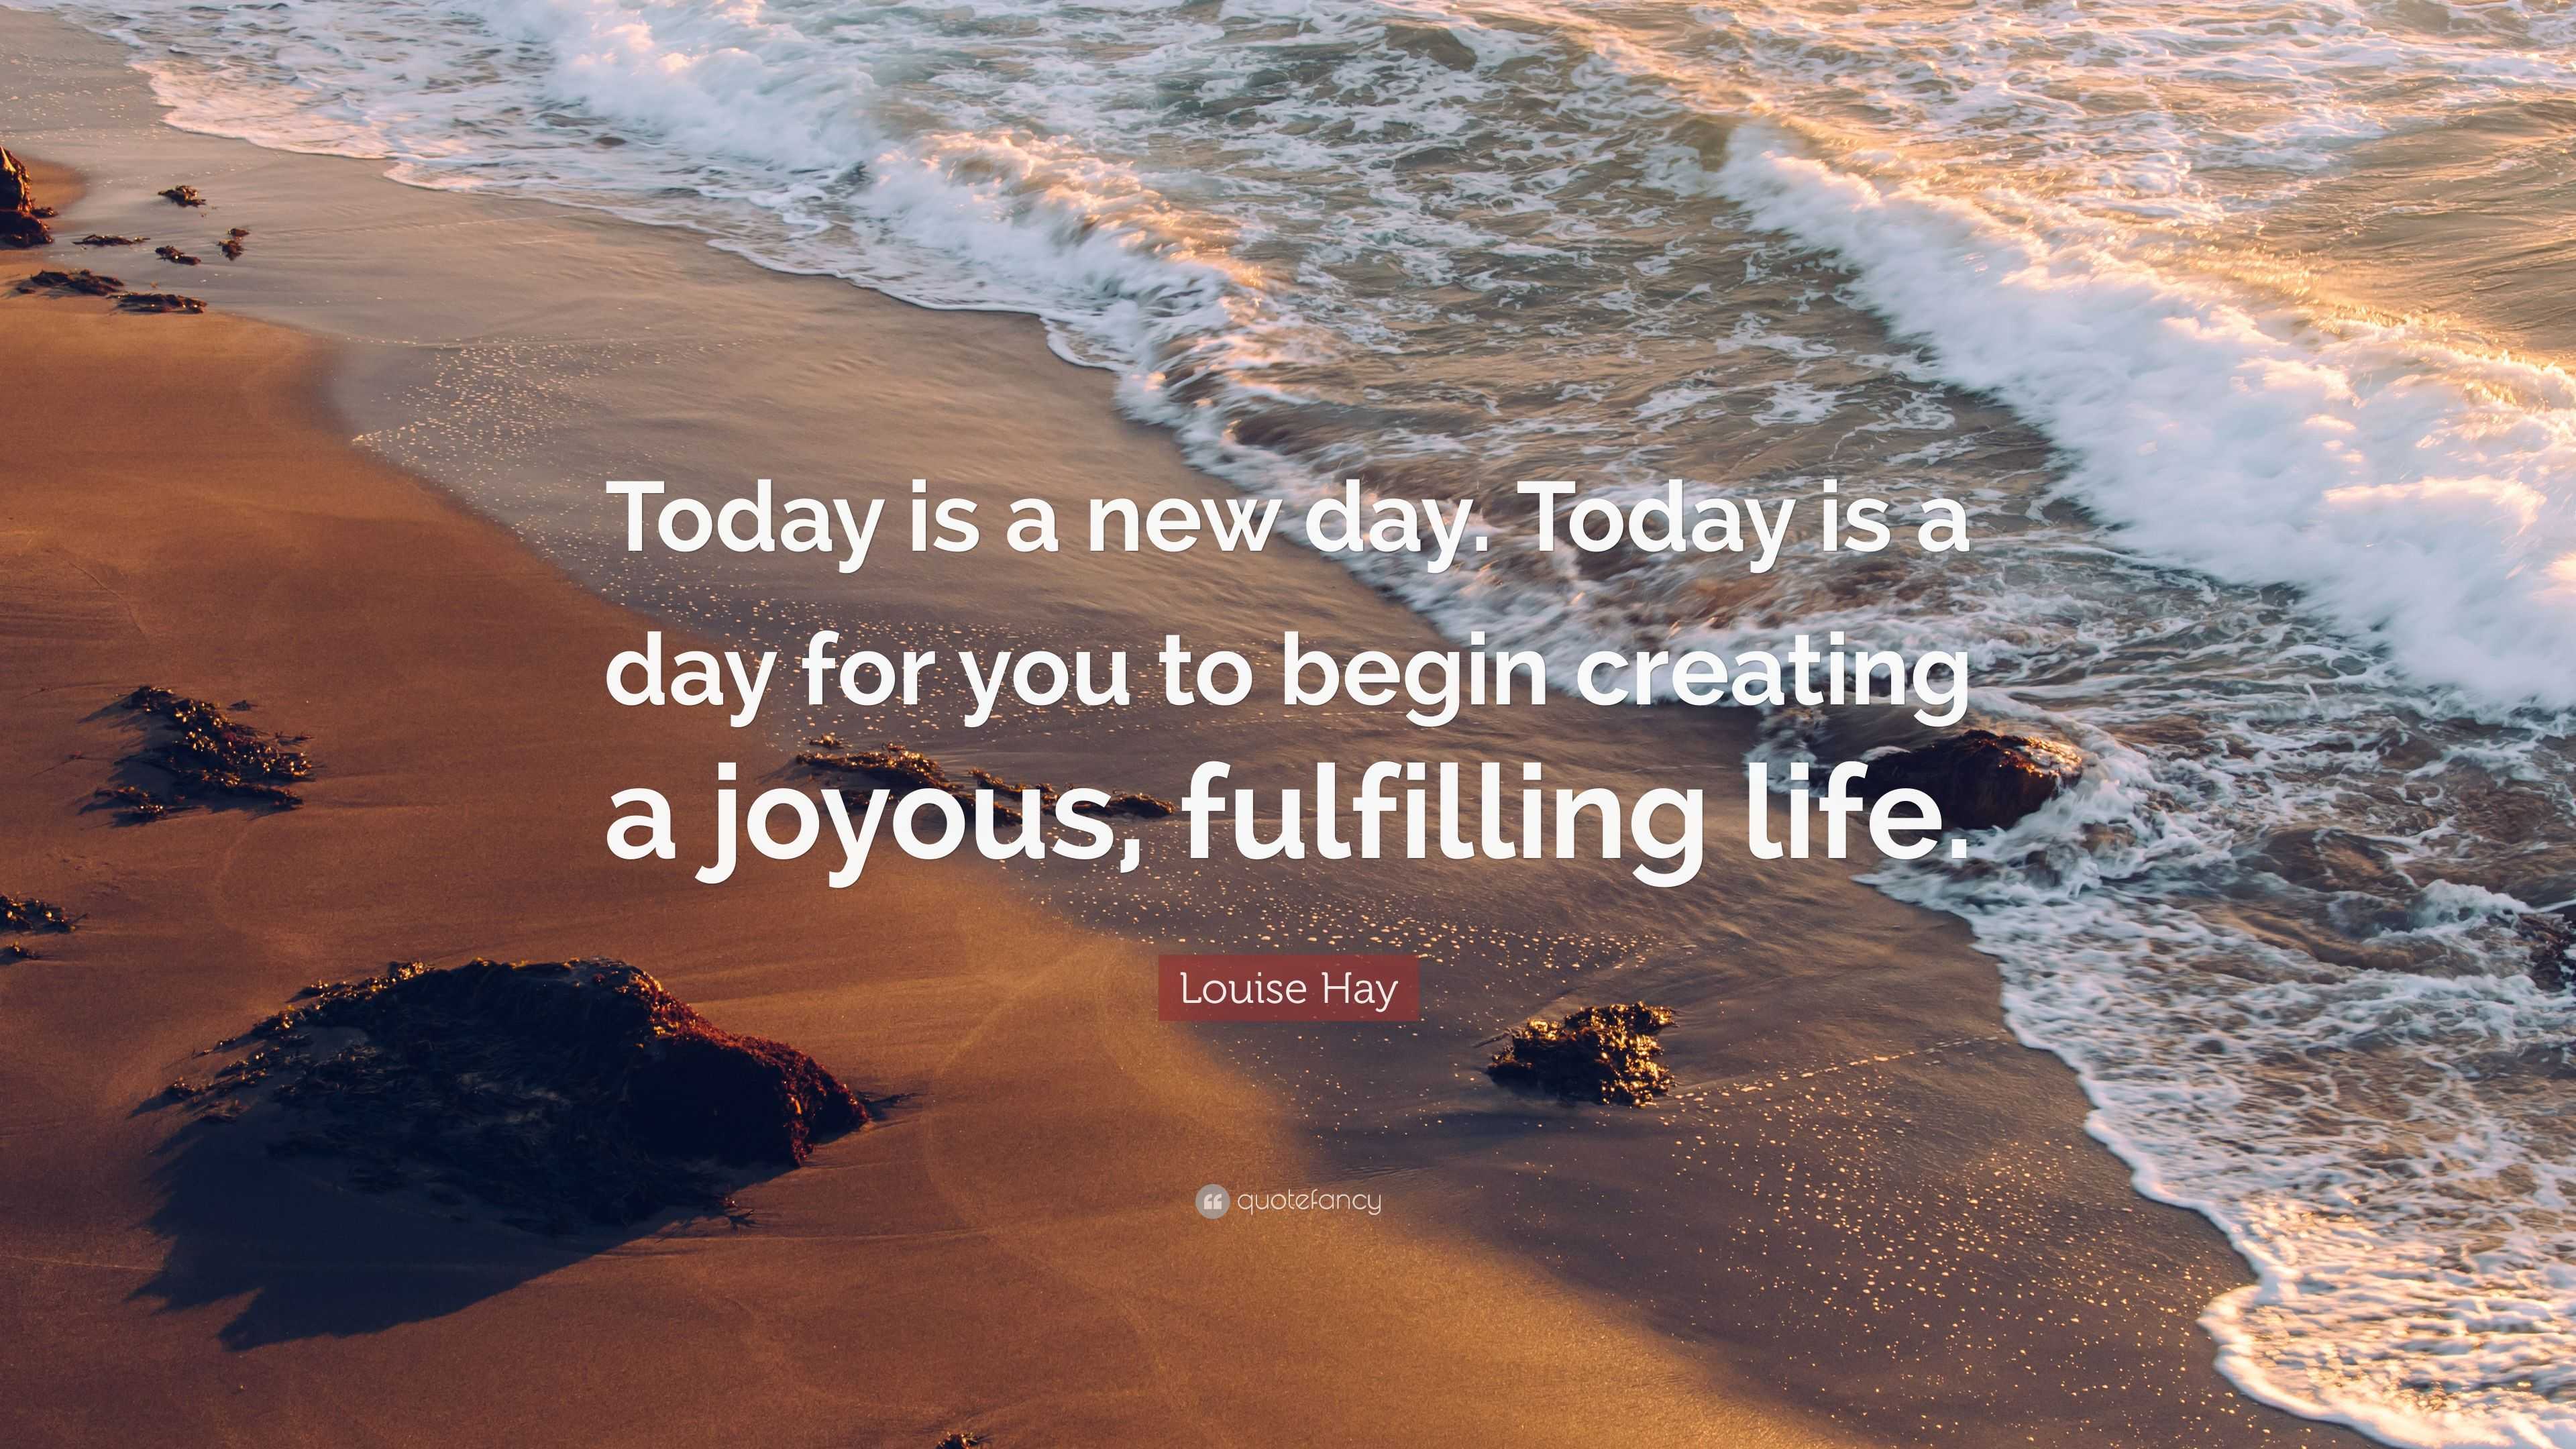 louise-hay-quote-today-is-a-new-day-today-is-a-day-for-you-to-begin